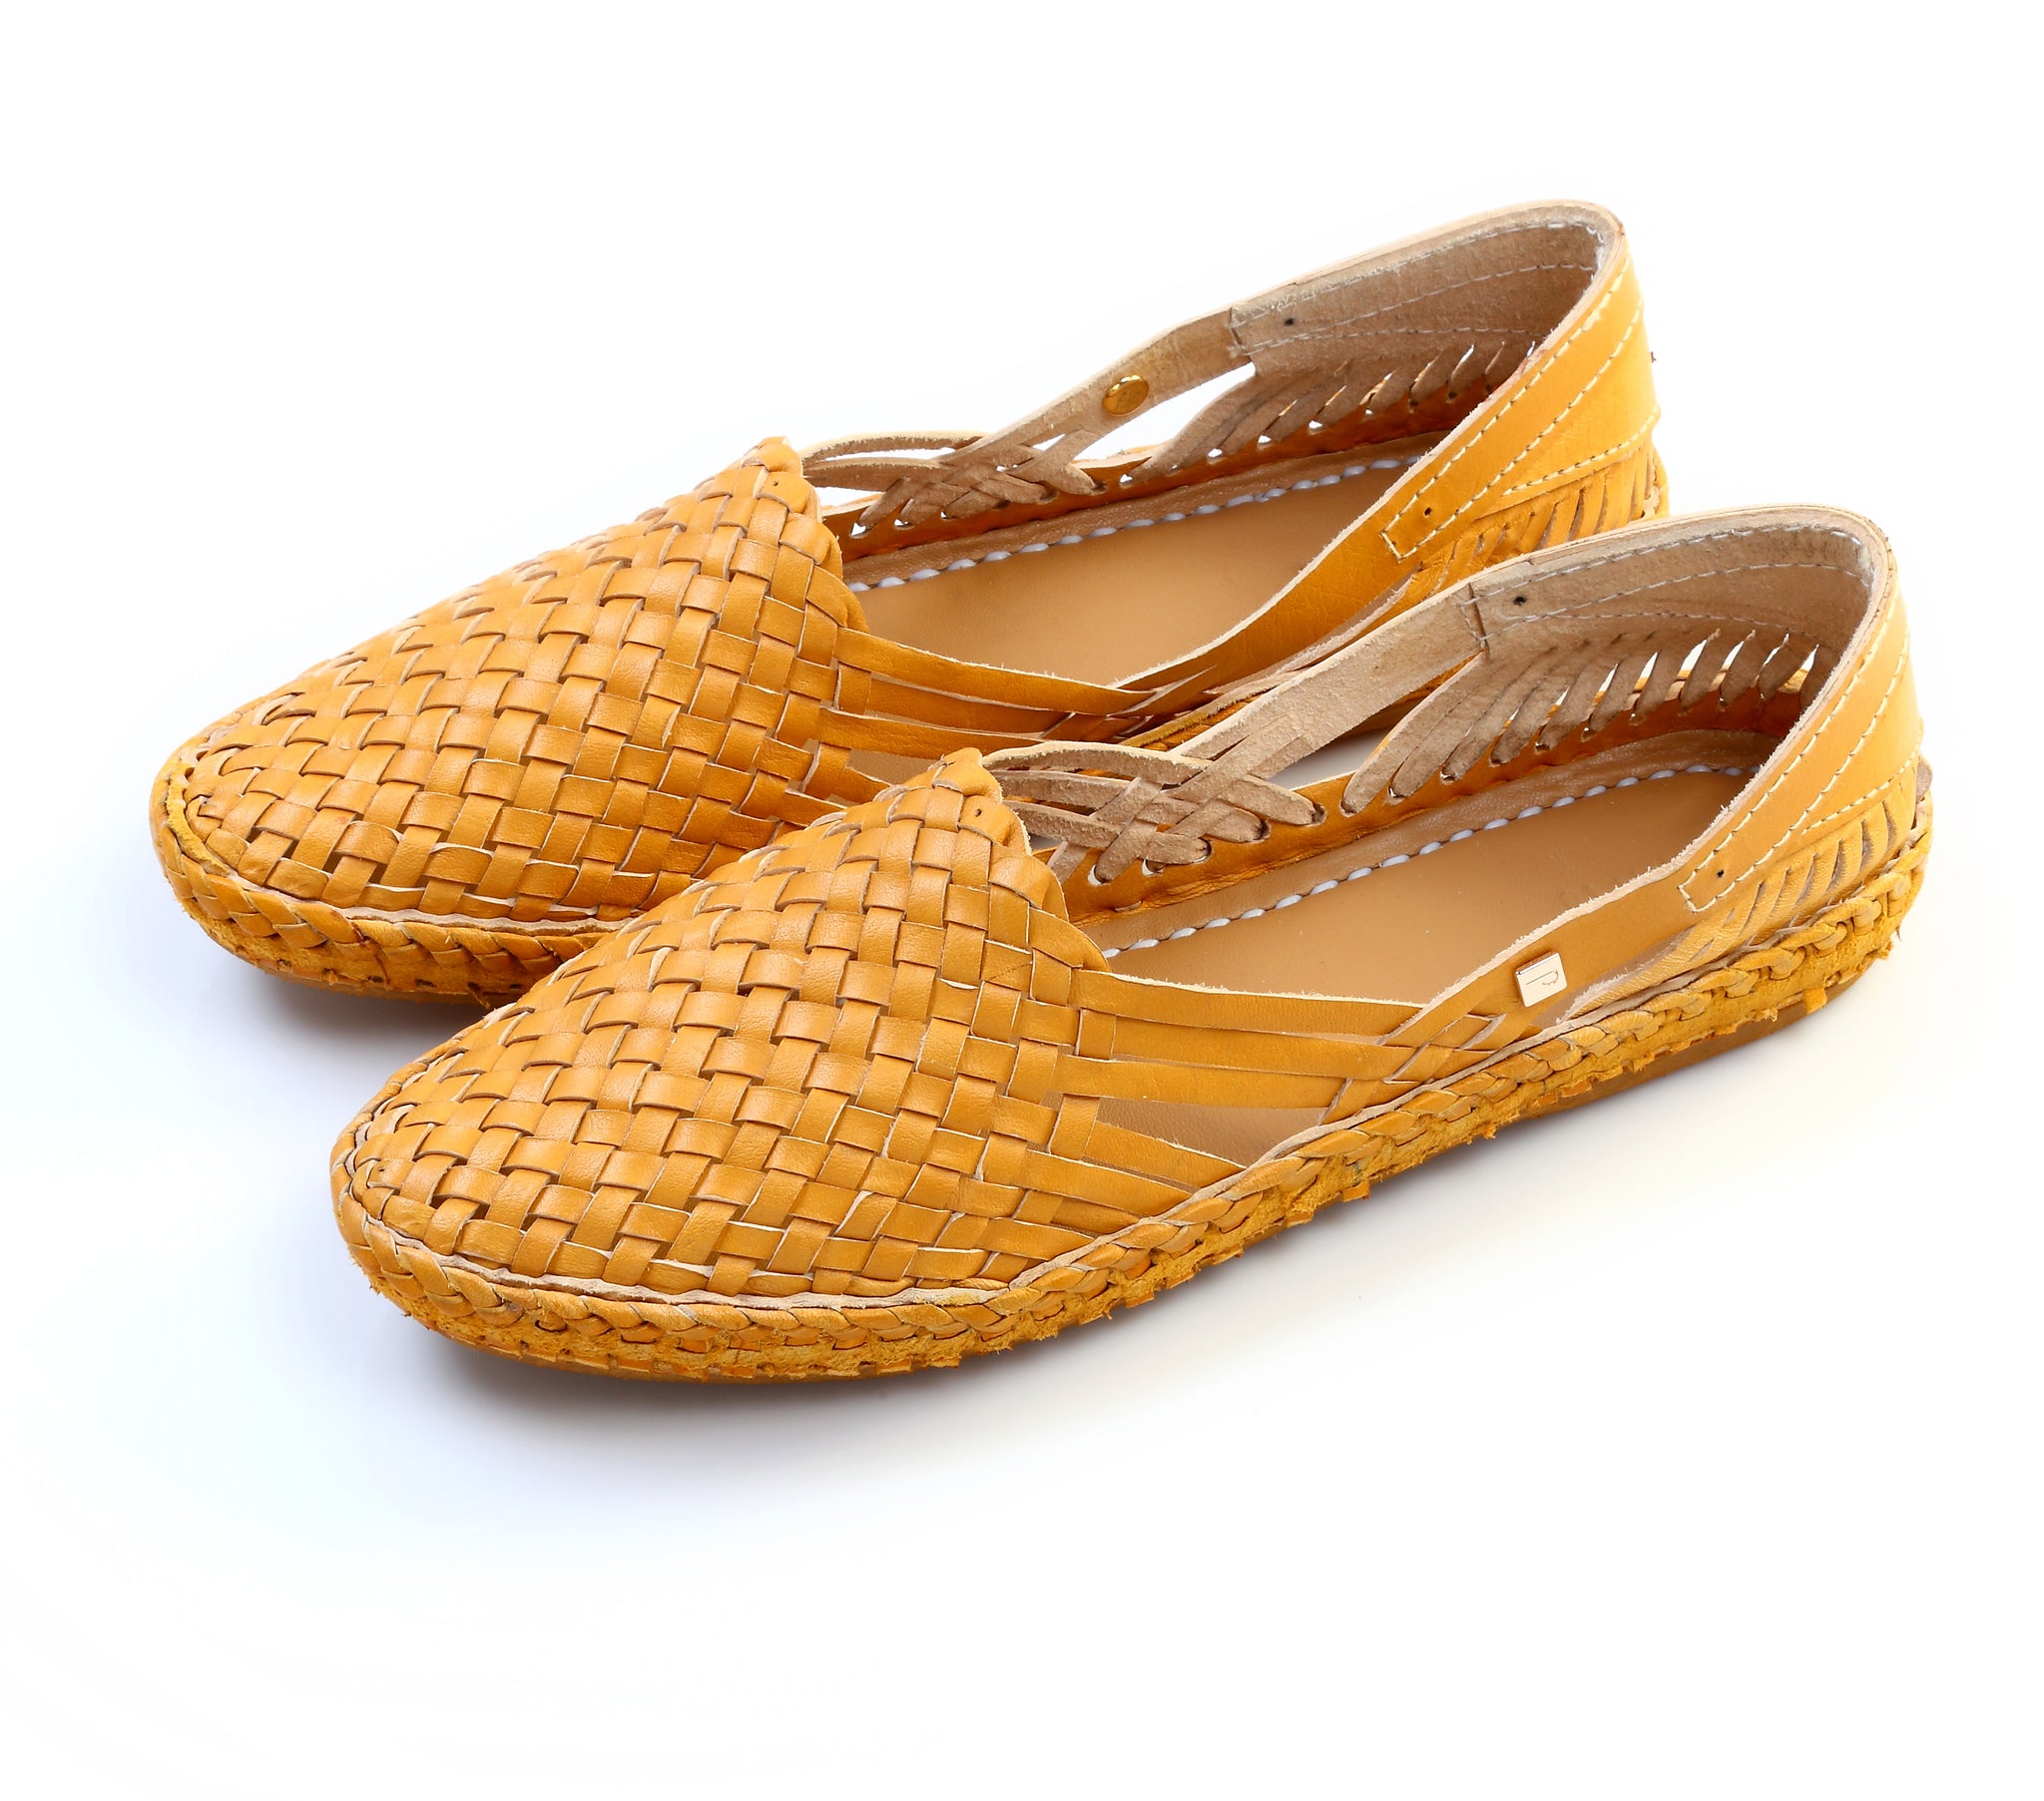 woven leather shoes ladies